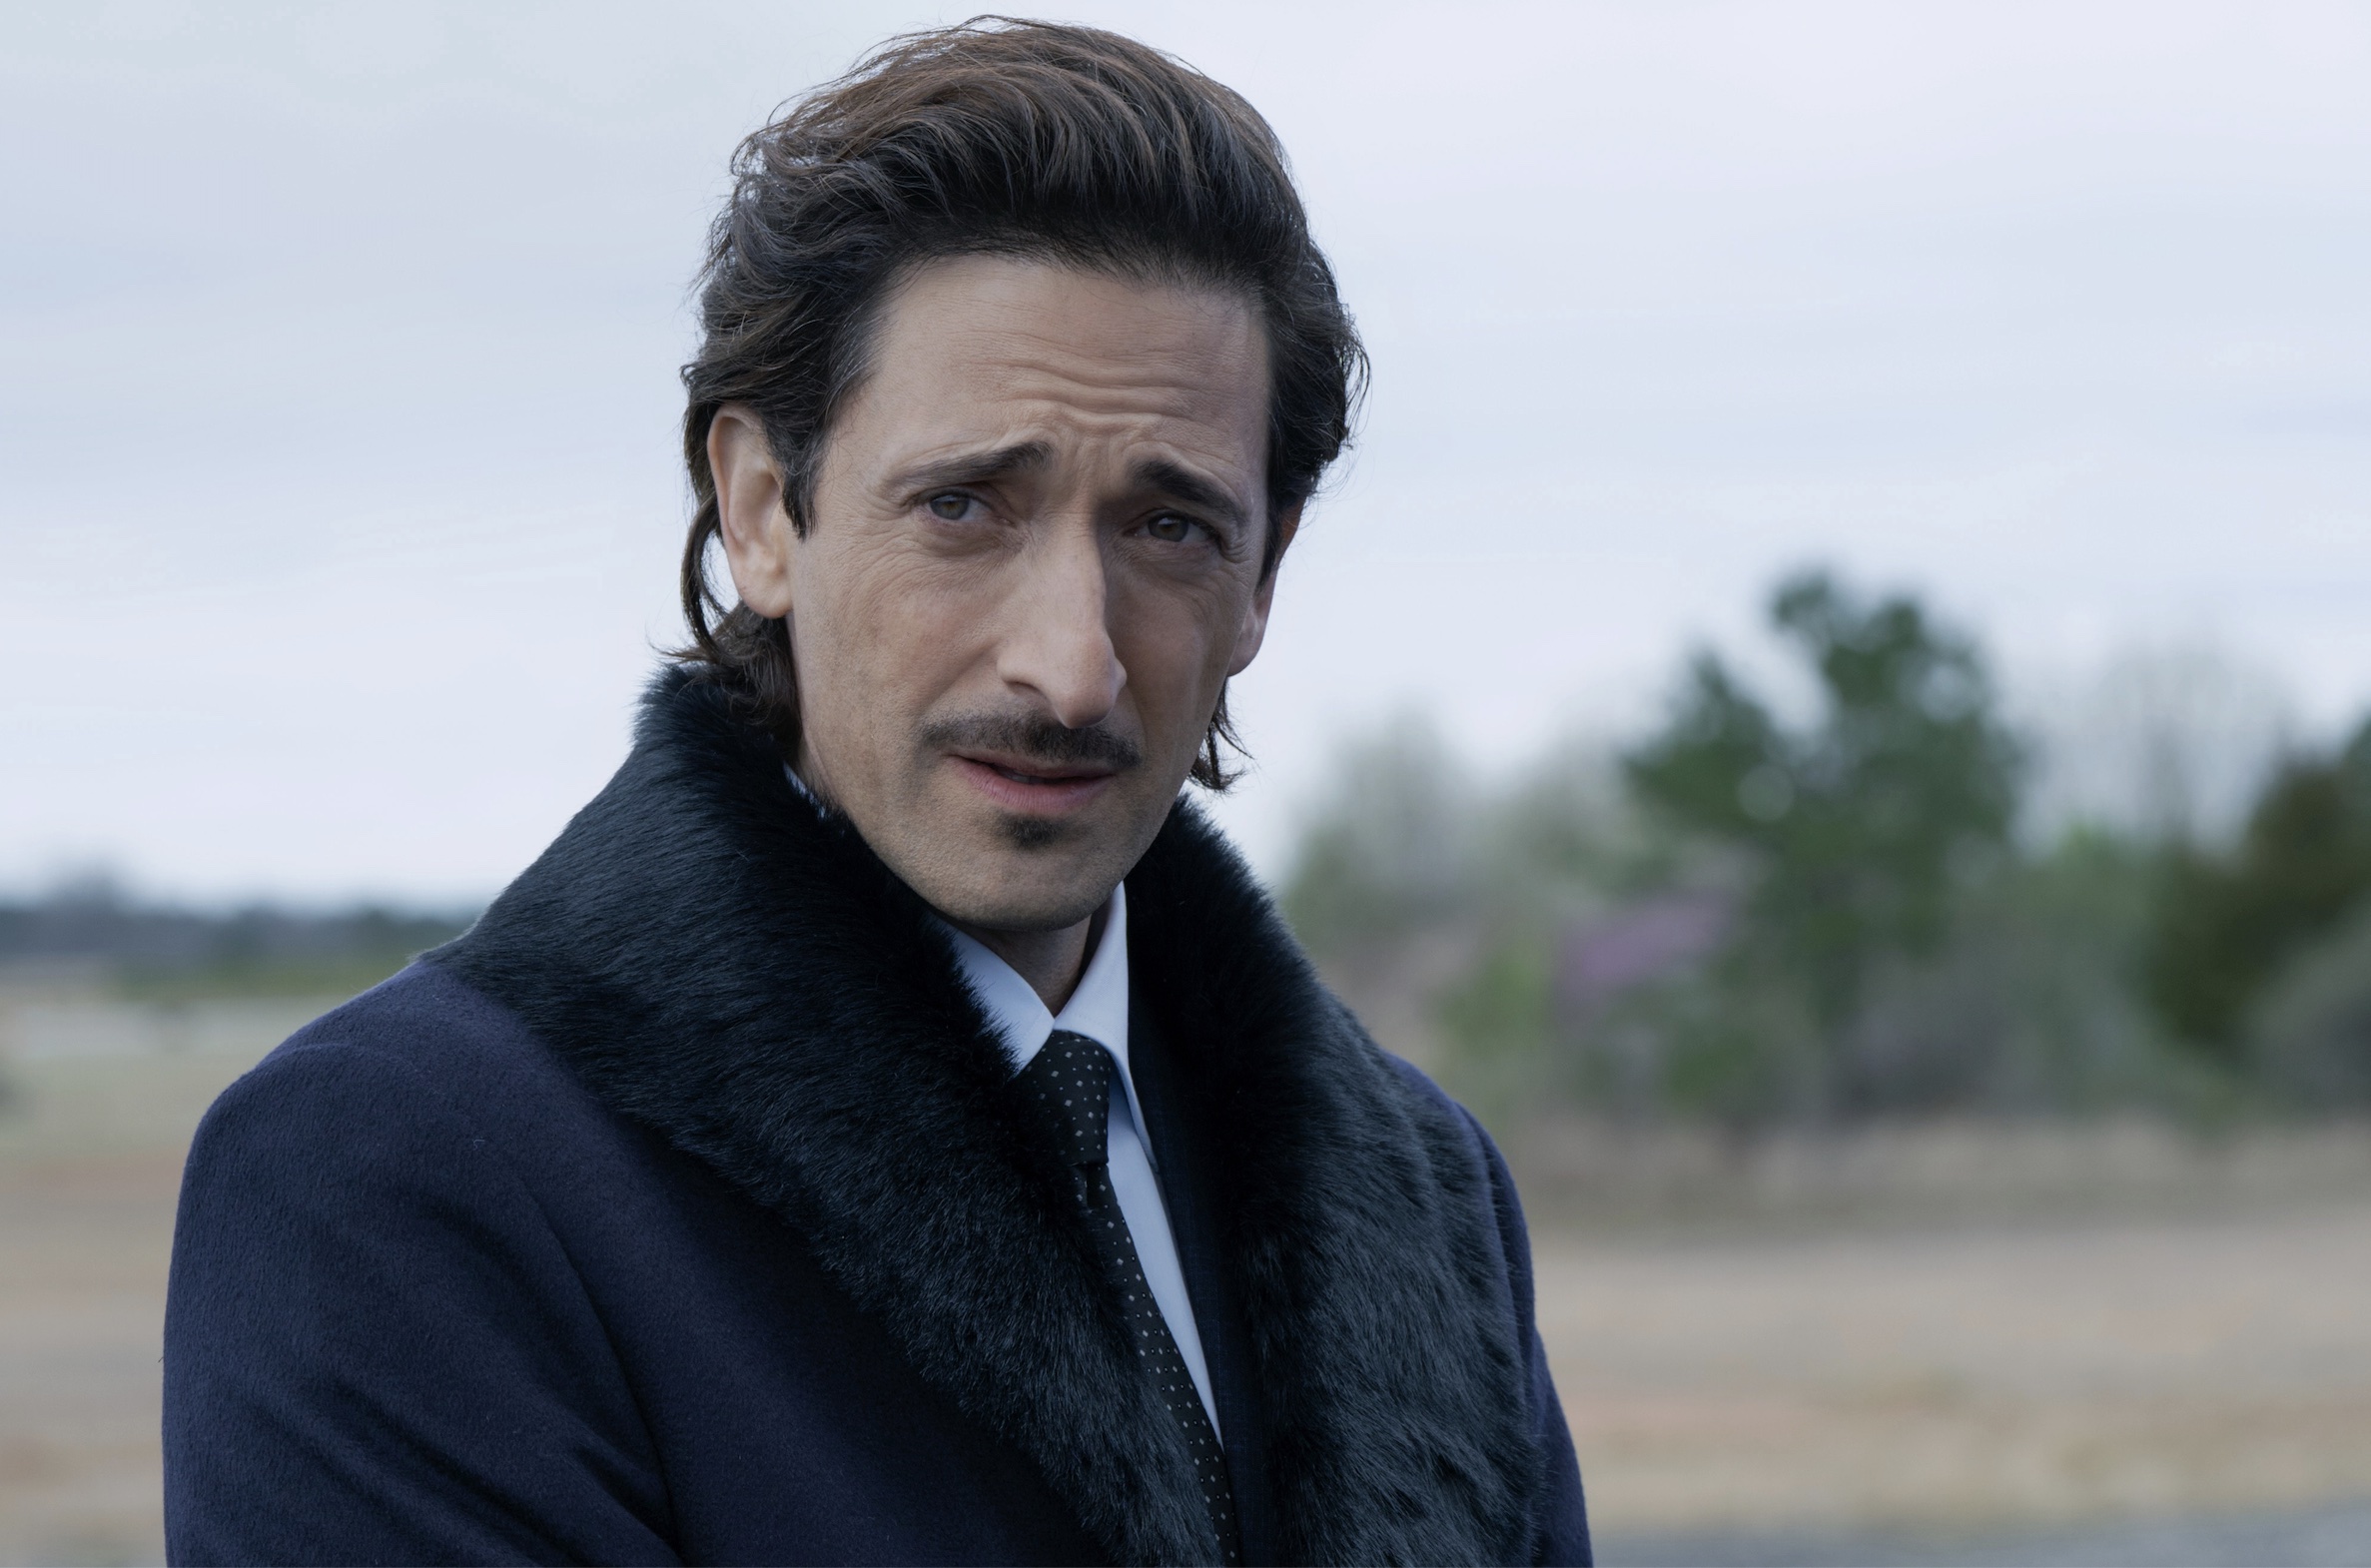 Ghosted Cast on Apple TV+ - Adrien Brody as Leveque